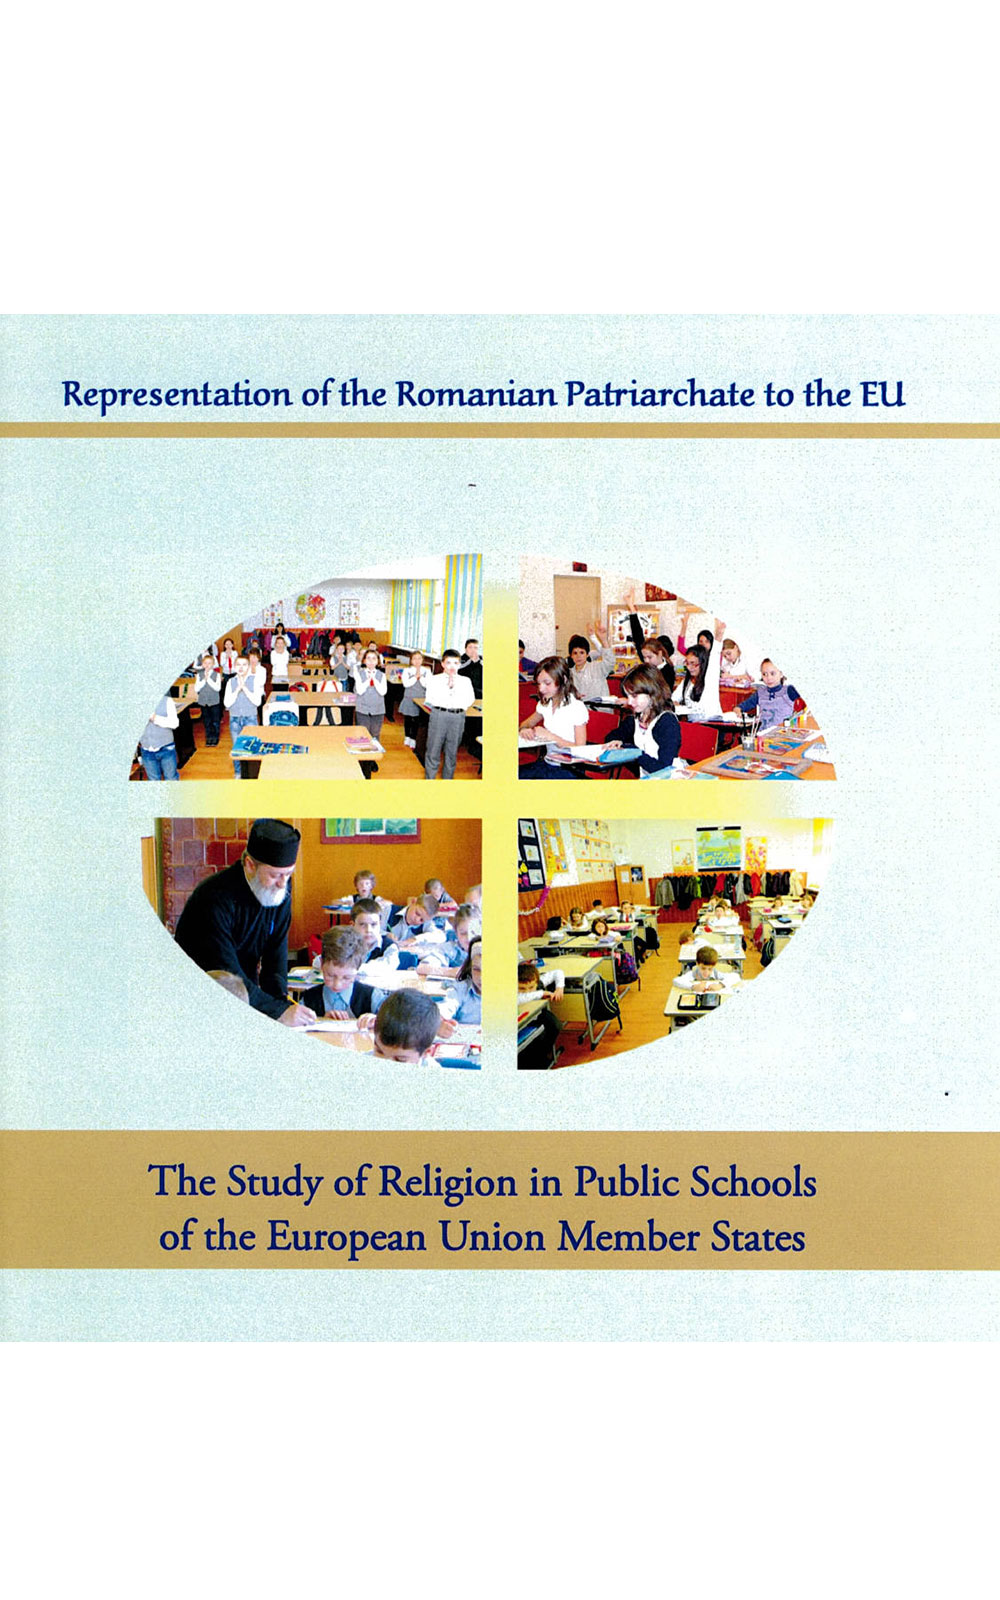 The Study of Religion in Public Schools of the European Union Member States